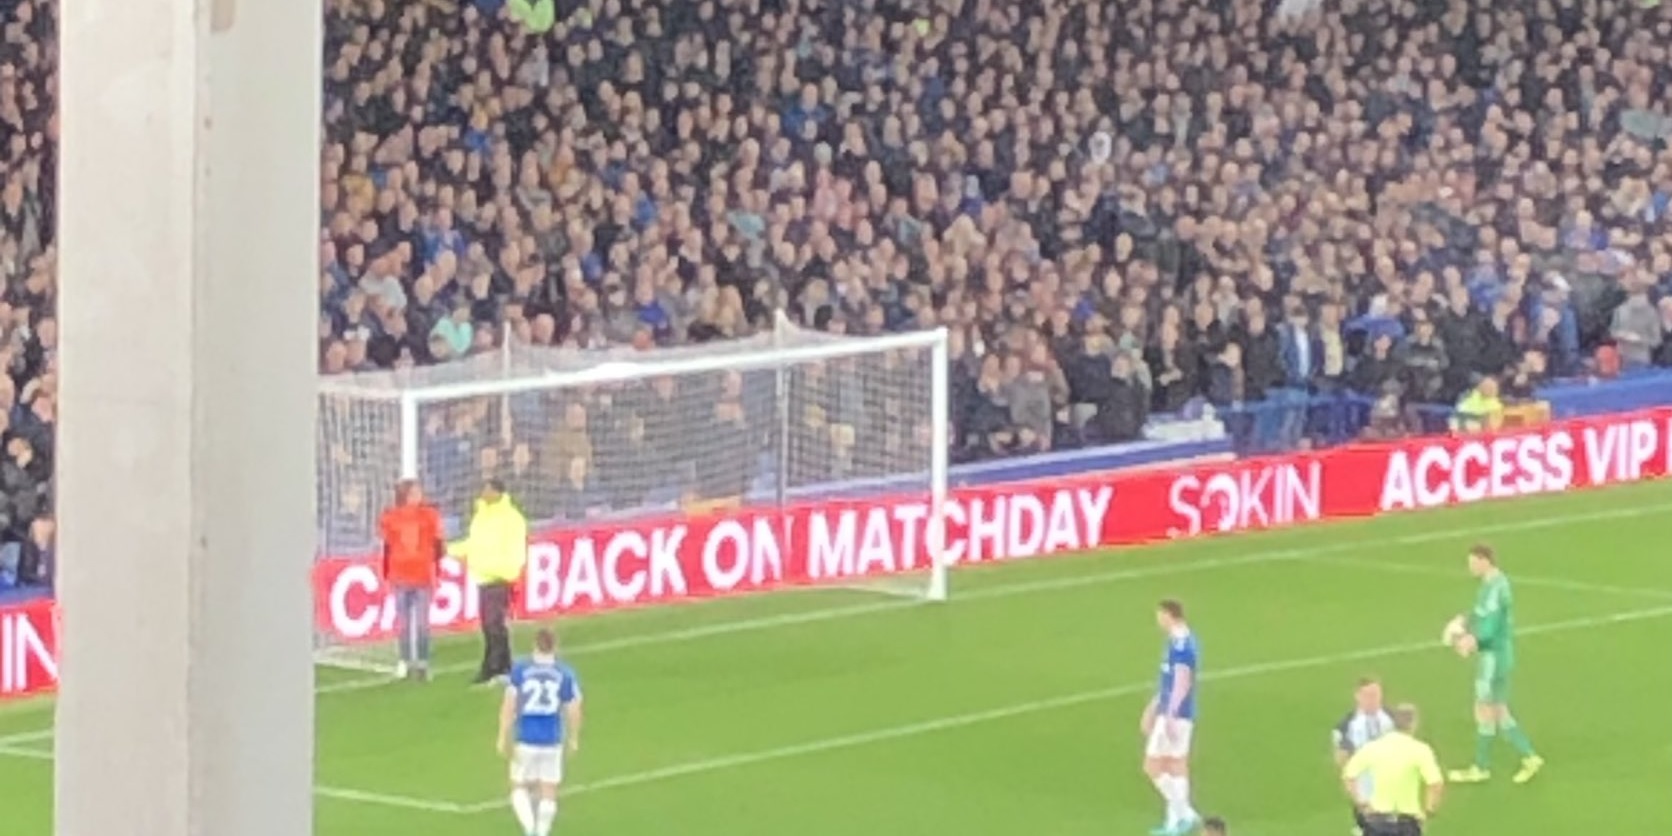 (Photos) Climate change protestor ties himself to goalpost during Everton v Newcastle tie